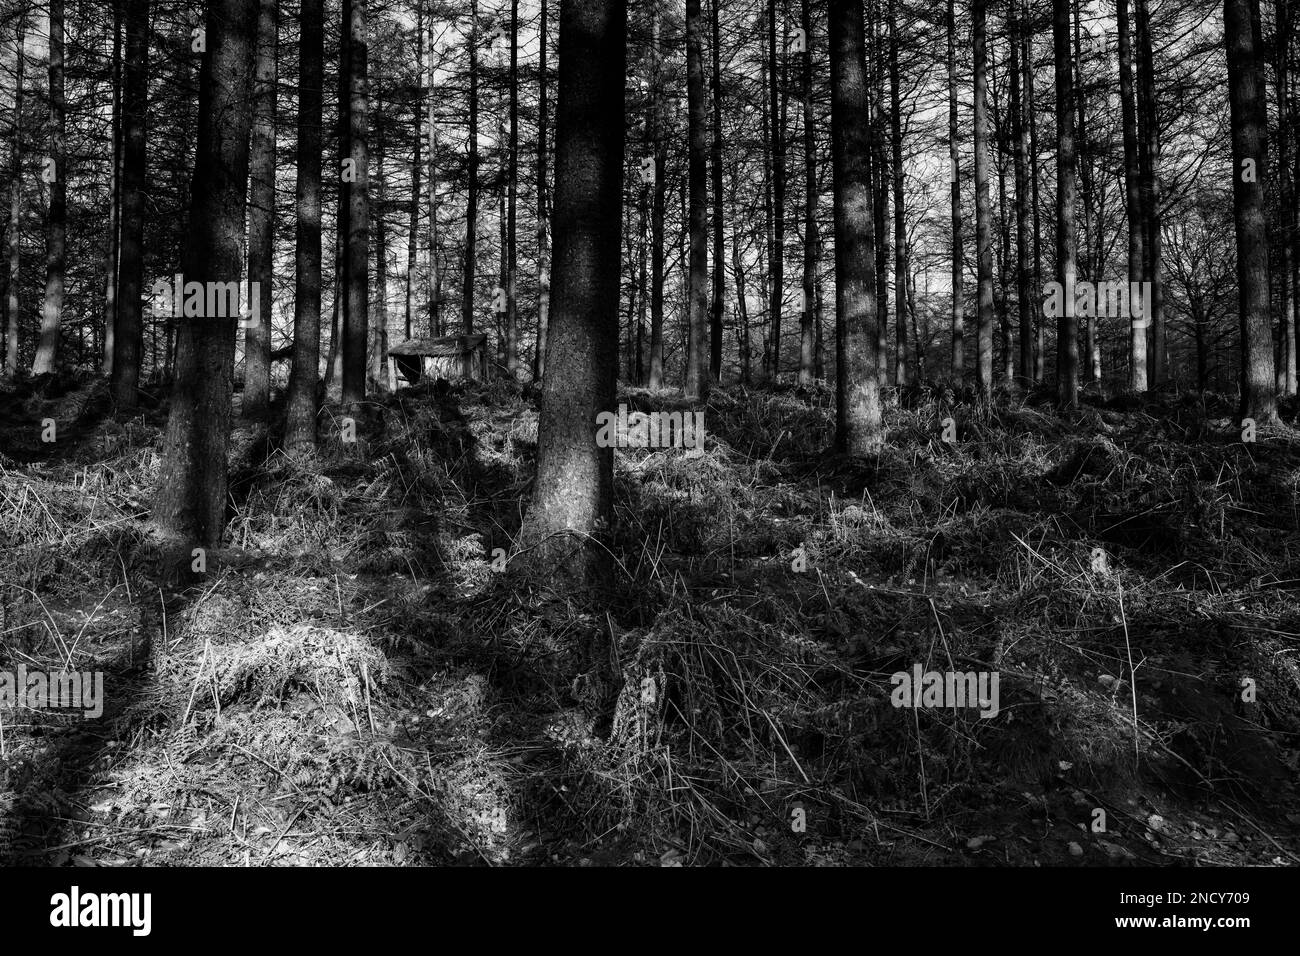 Light falling on an old shed in a stand of conifer trees, Beacon Wood, Penrith, Cumbria, UK Stock Photo